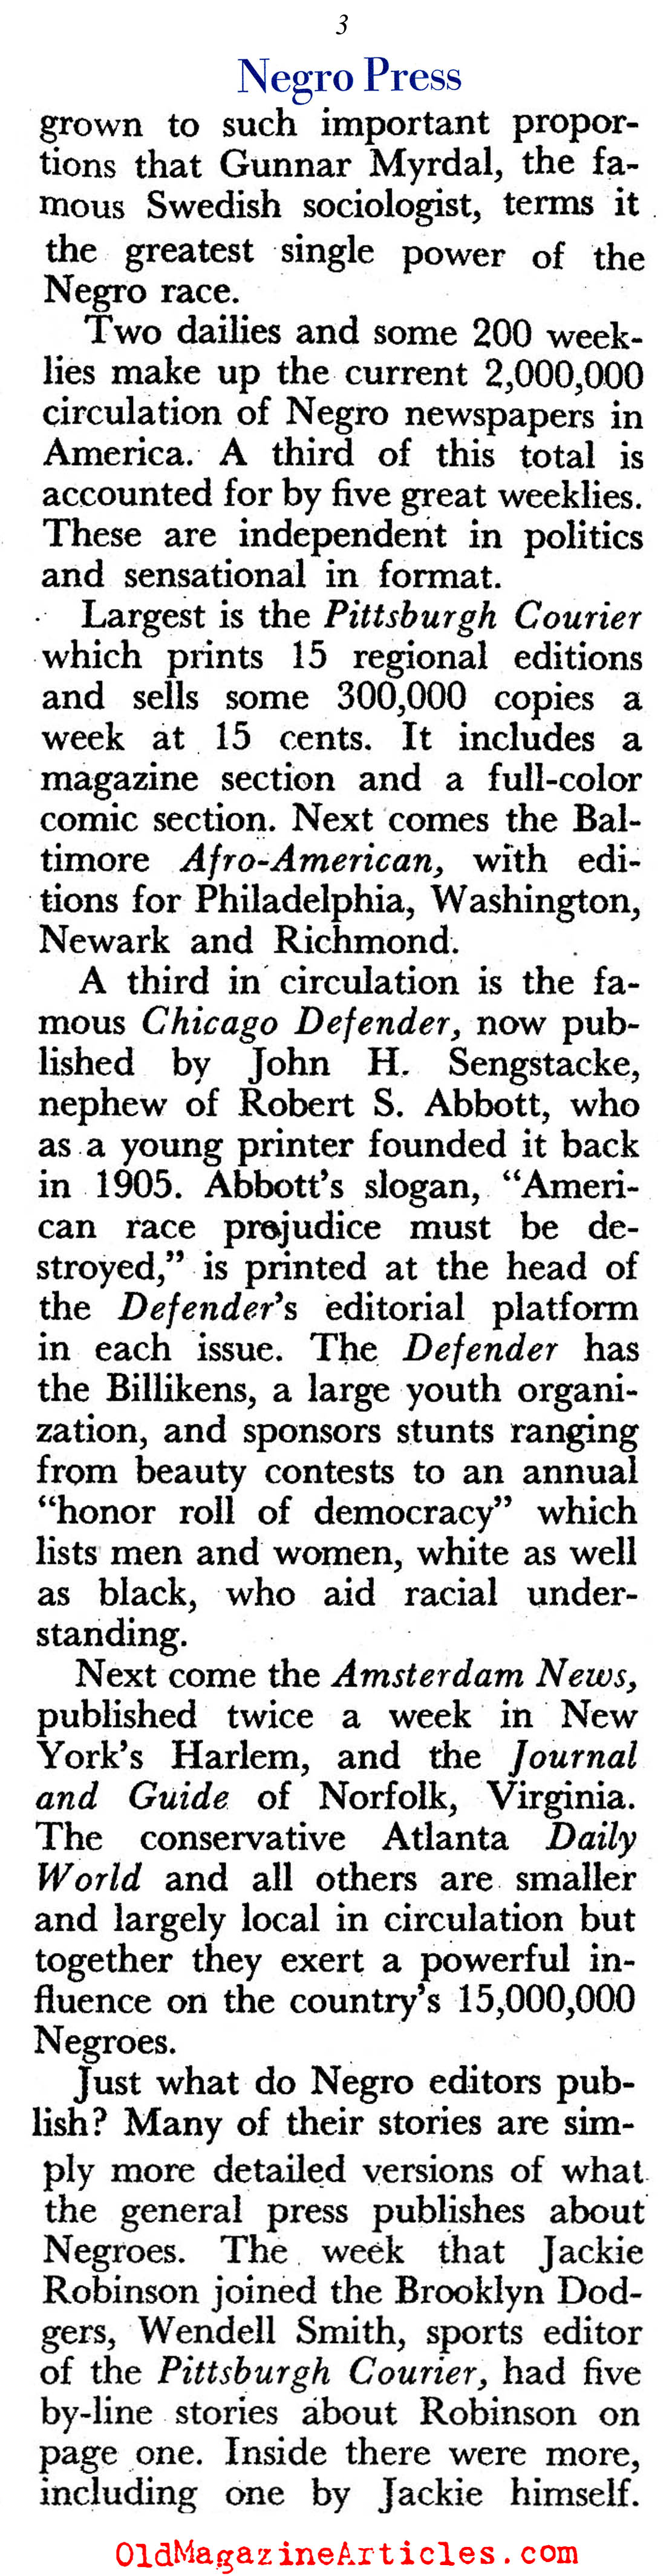 The Power of the African-American Press (Pageant Magazine, 1952)